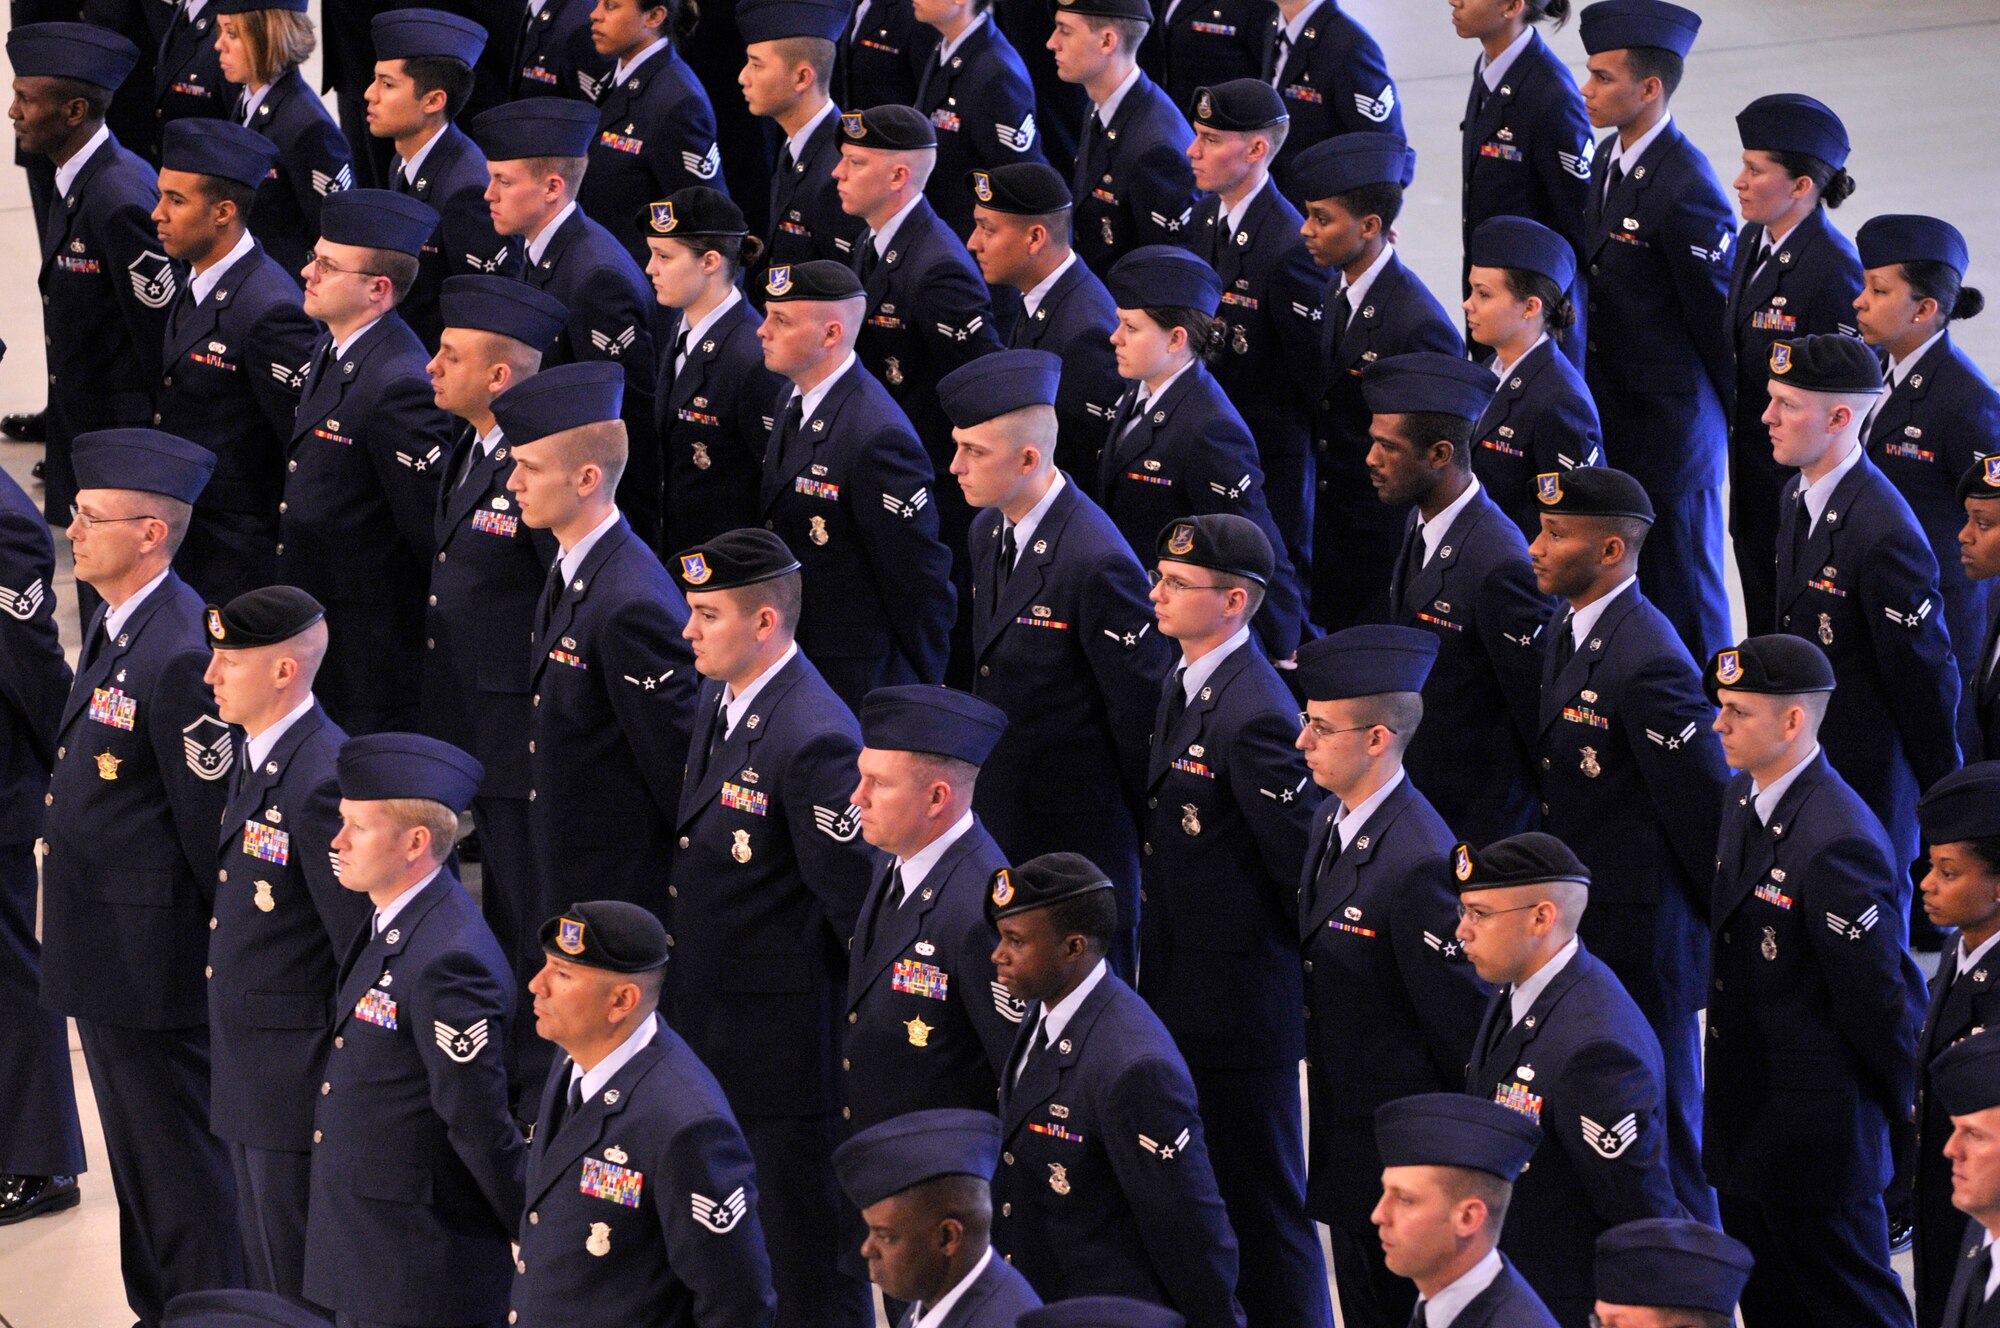 U.S. Air Force Airmen from the 435th Air Base Wing participate in a change of command ceremony in Hangar one, Ramstein Air Base, Germany, June 11, 2009. (U.S. Air Force photo by Staff Sgt. Stephen J. Otero)